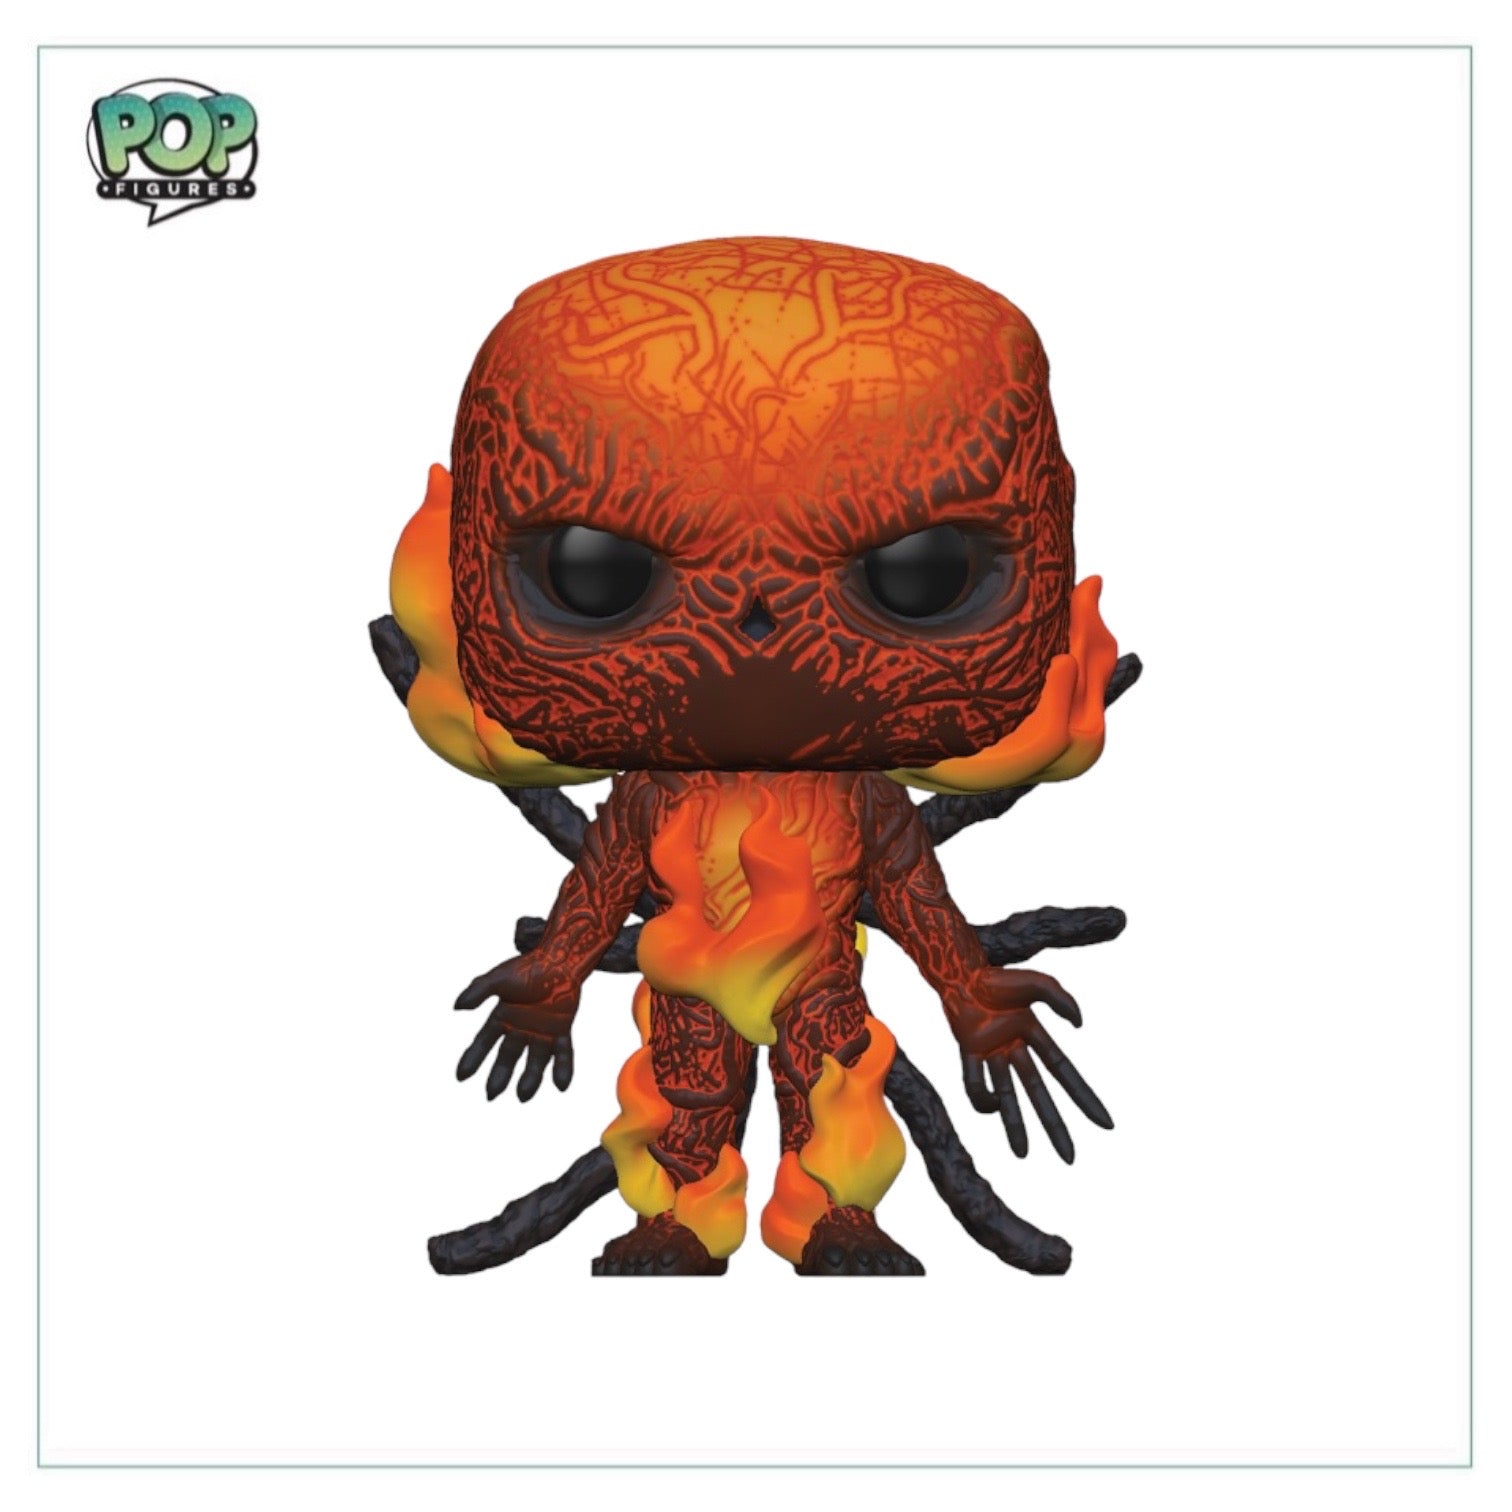 Vecna #1464 (Glows in the Dark) Funko Pop! - Stranger Things - Hot Topic Exclusive